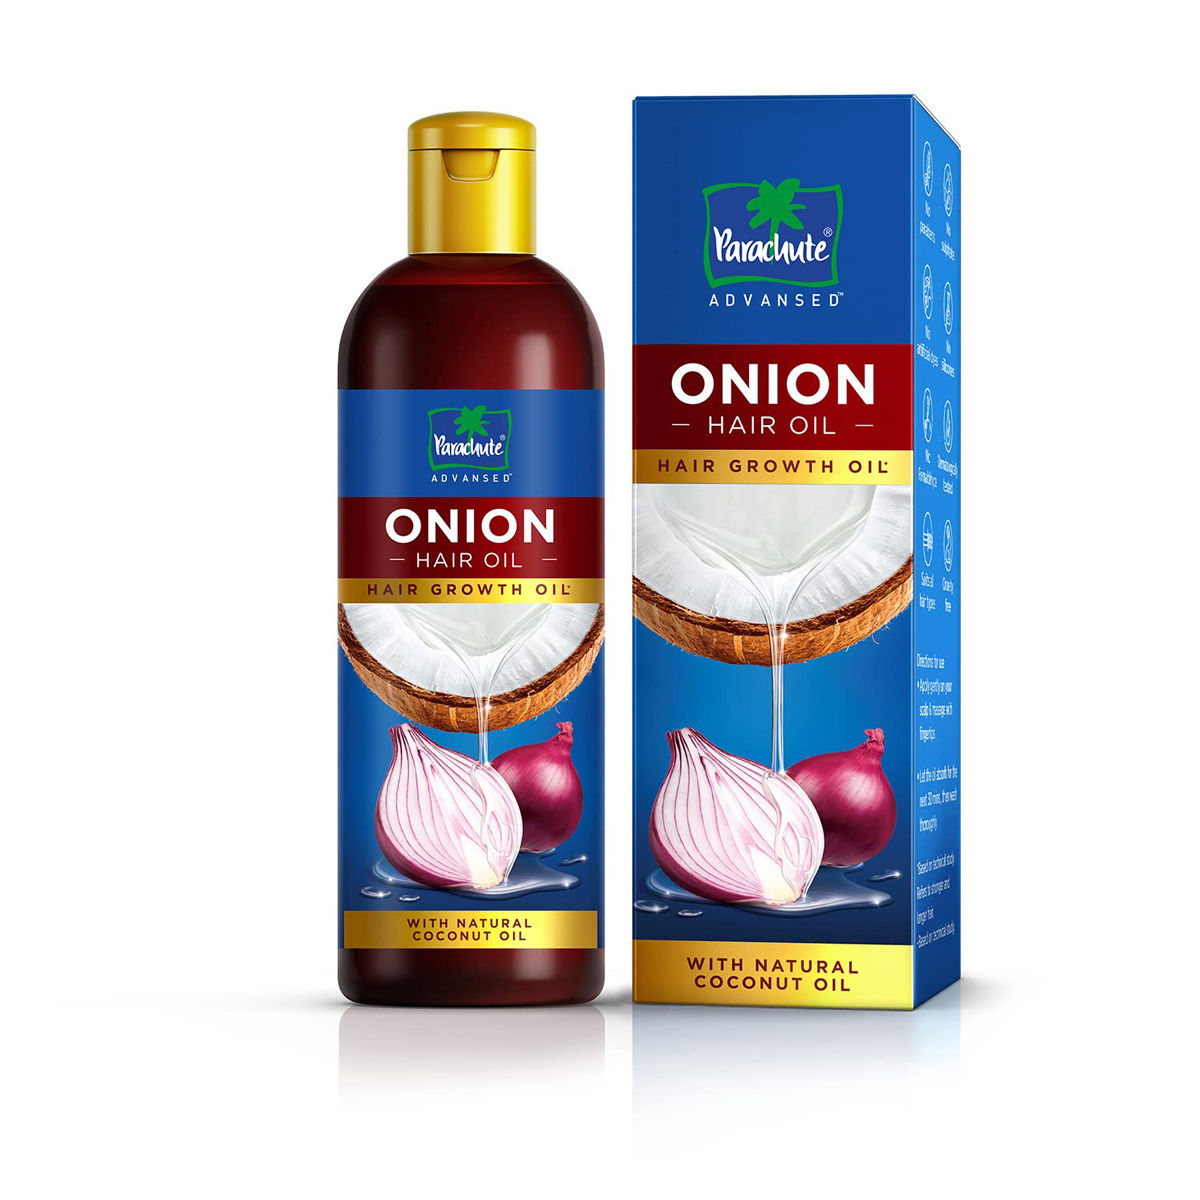 Parachute Advansed Onion Hair Oil, 200 ml Price, Uses, Side Effects,  Composition - Apollo Pharmacy